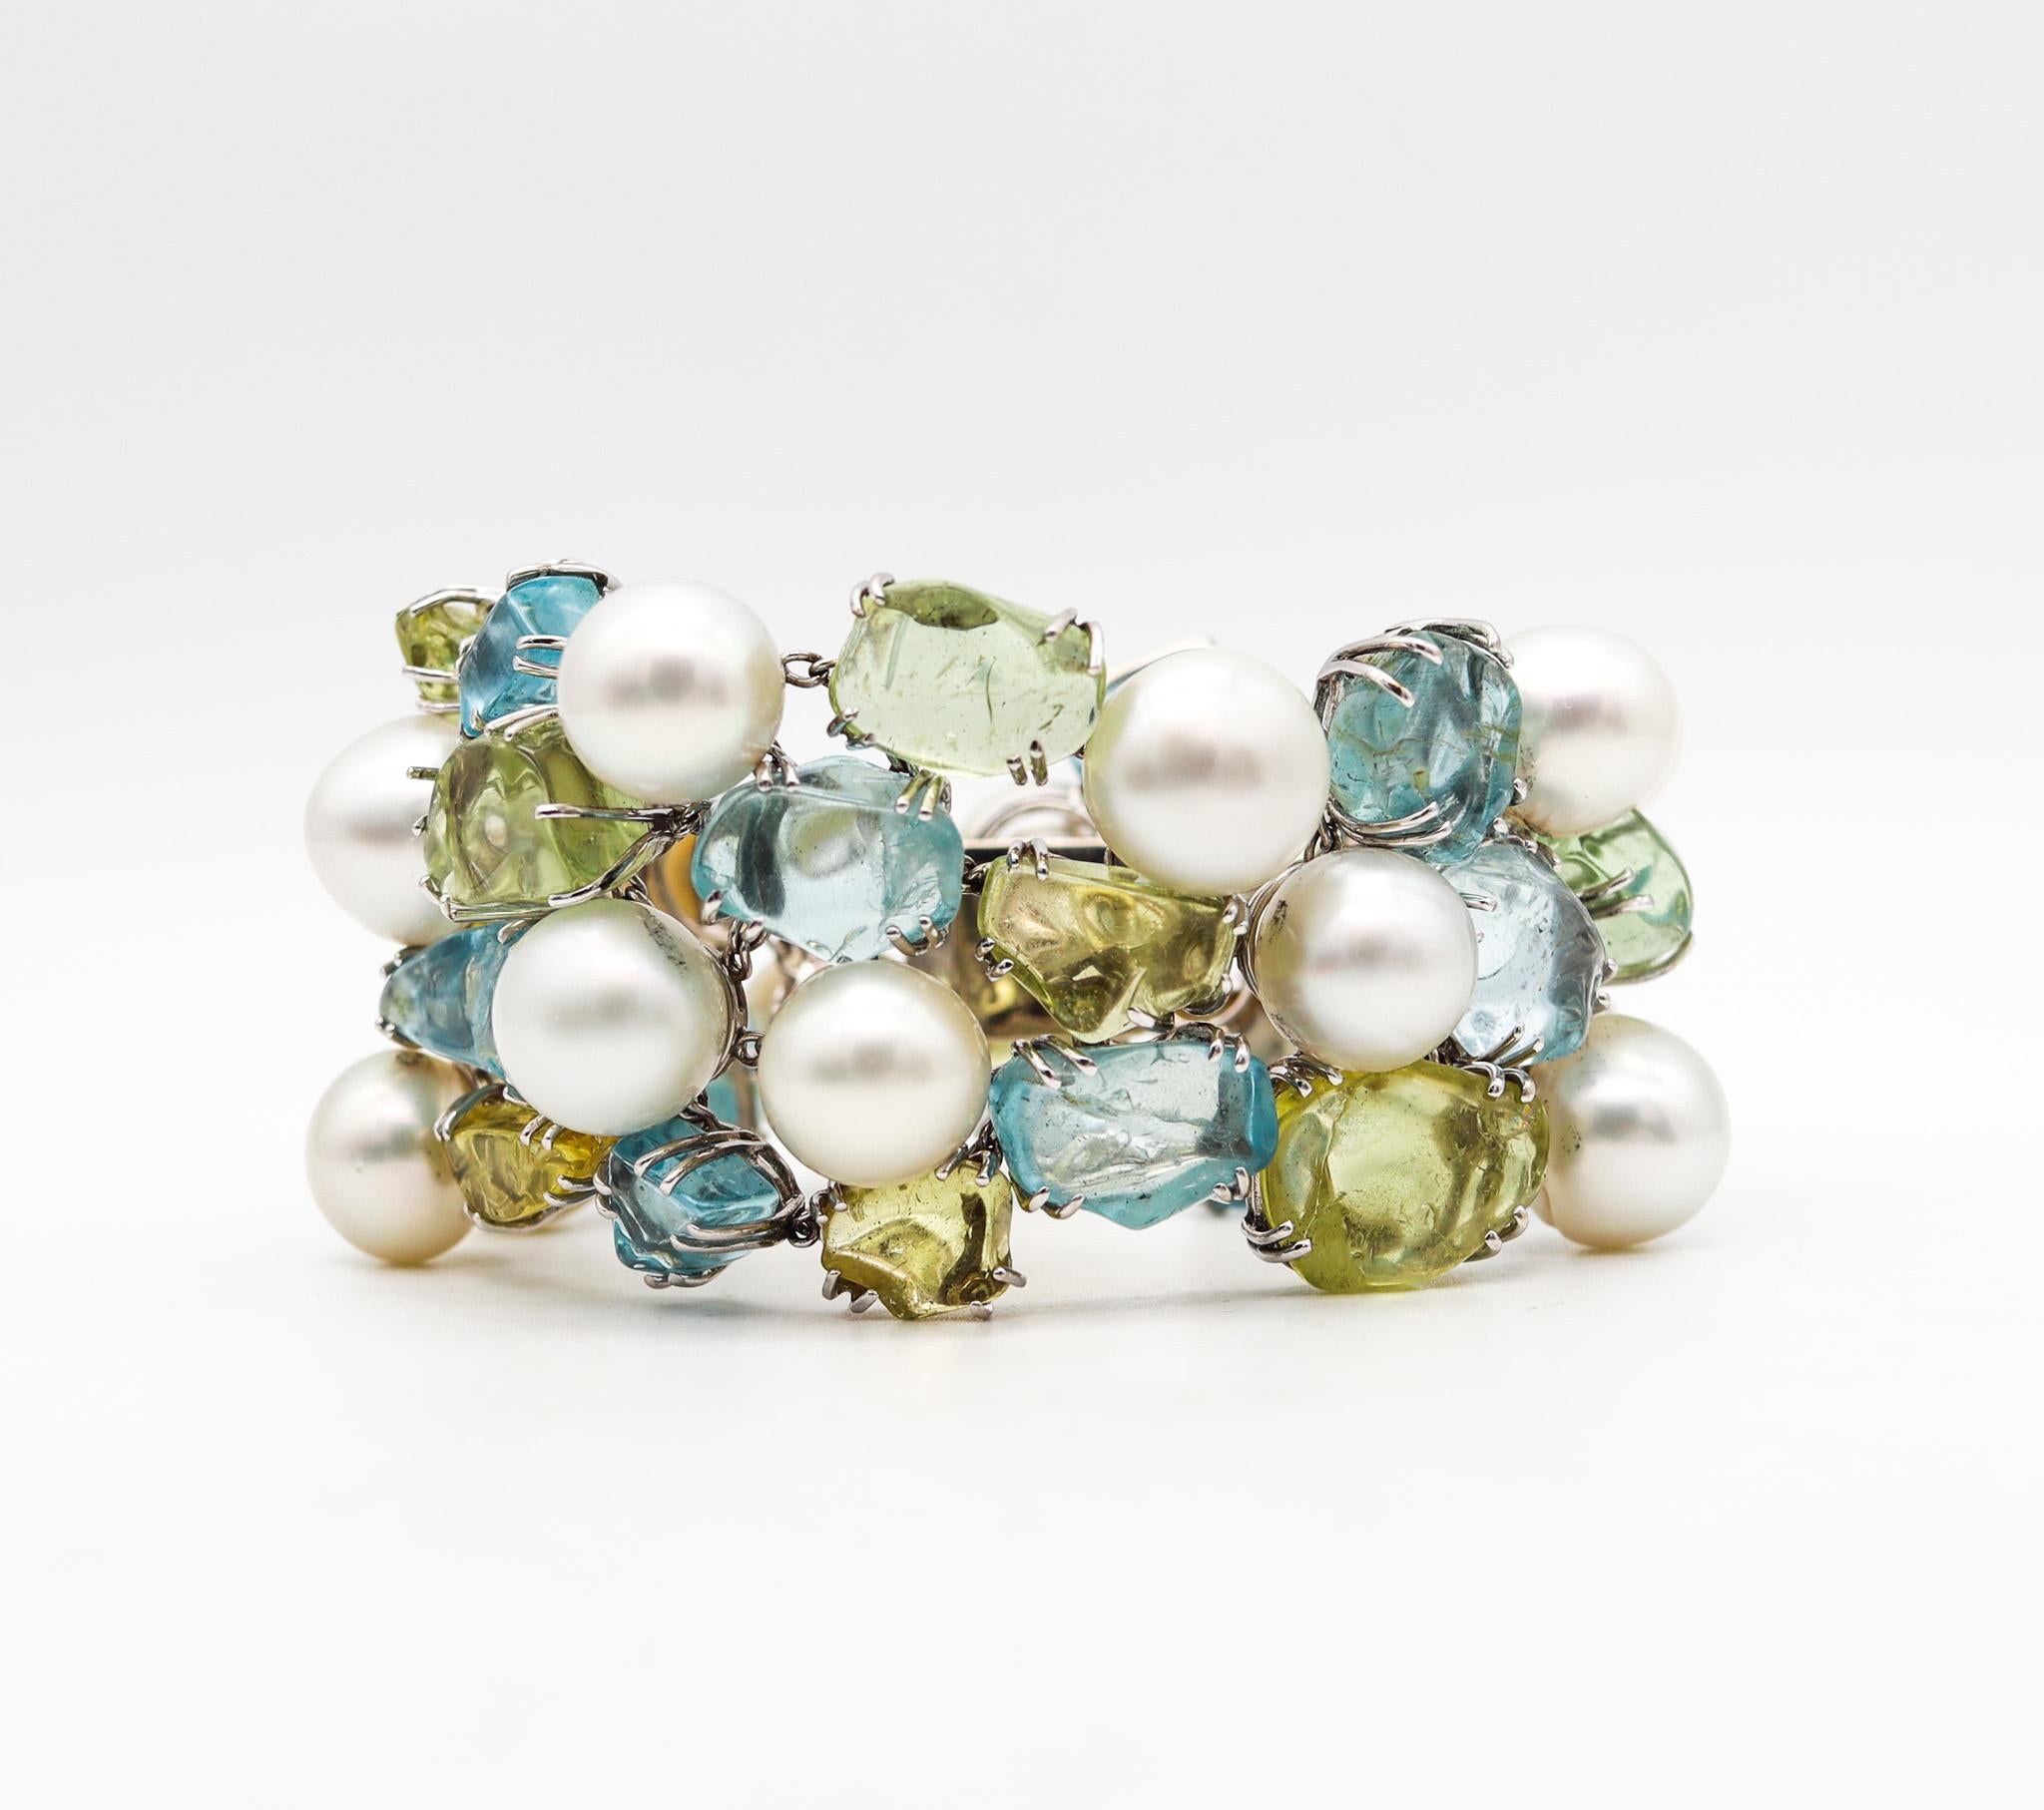 Pearls and gem bracelet designed by Salavetti Milano.

An statement large bracelet with south sea pearls, aquamarines and green beryl, created in Milano Italy by the jewelry house of Salavetti. Crafted with exceptional details having a huge massive